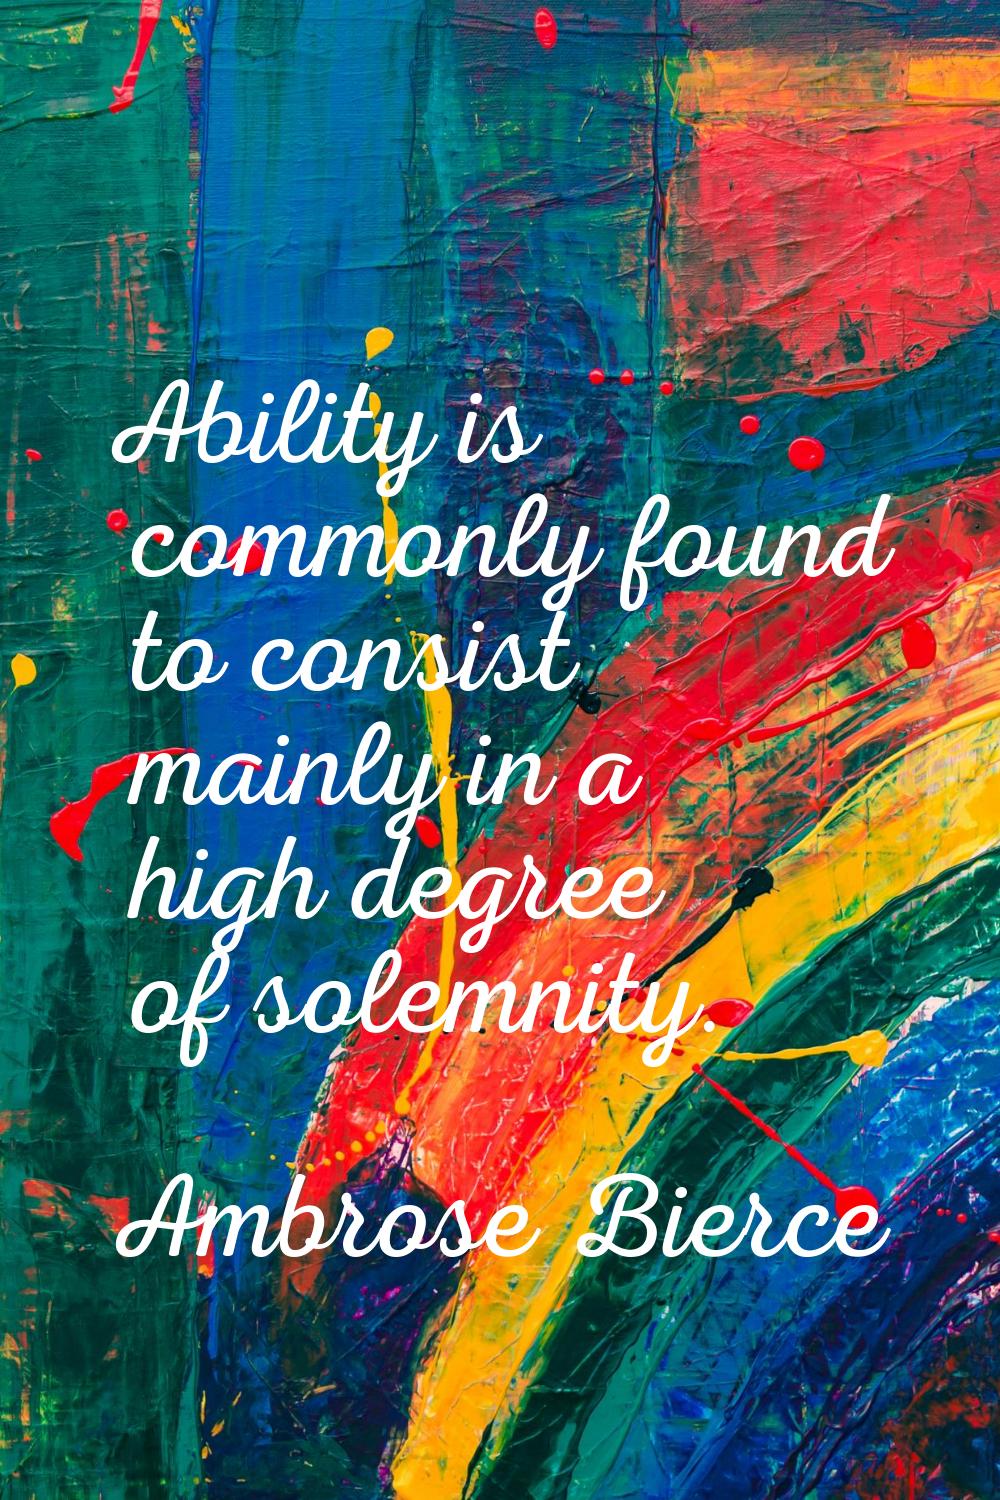 Ability is commonly found to consist mainly in a high degree of solemnity.